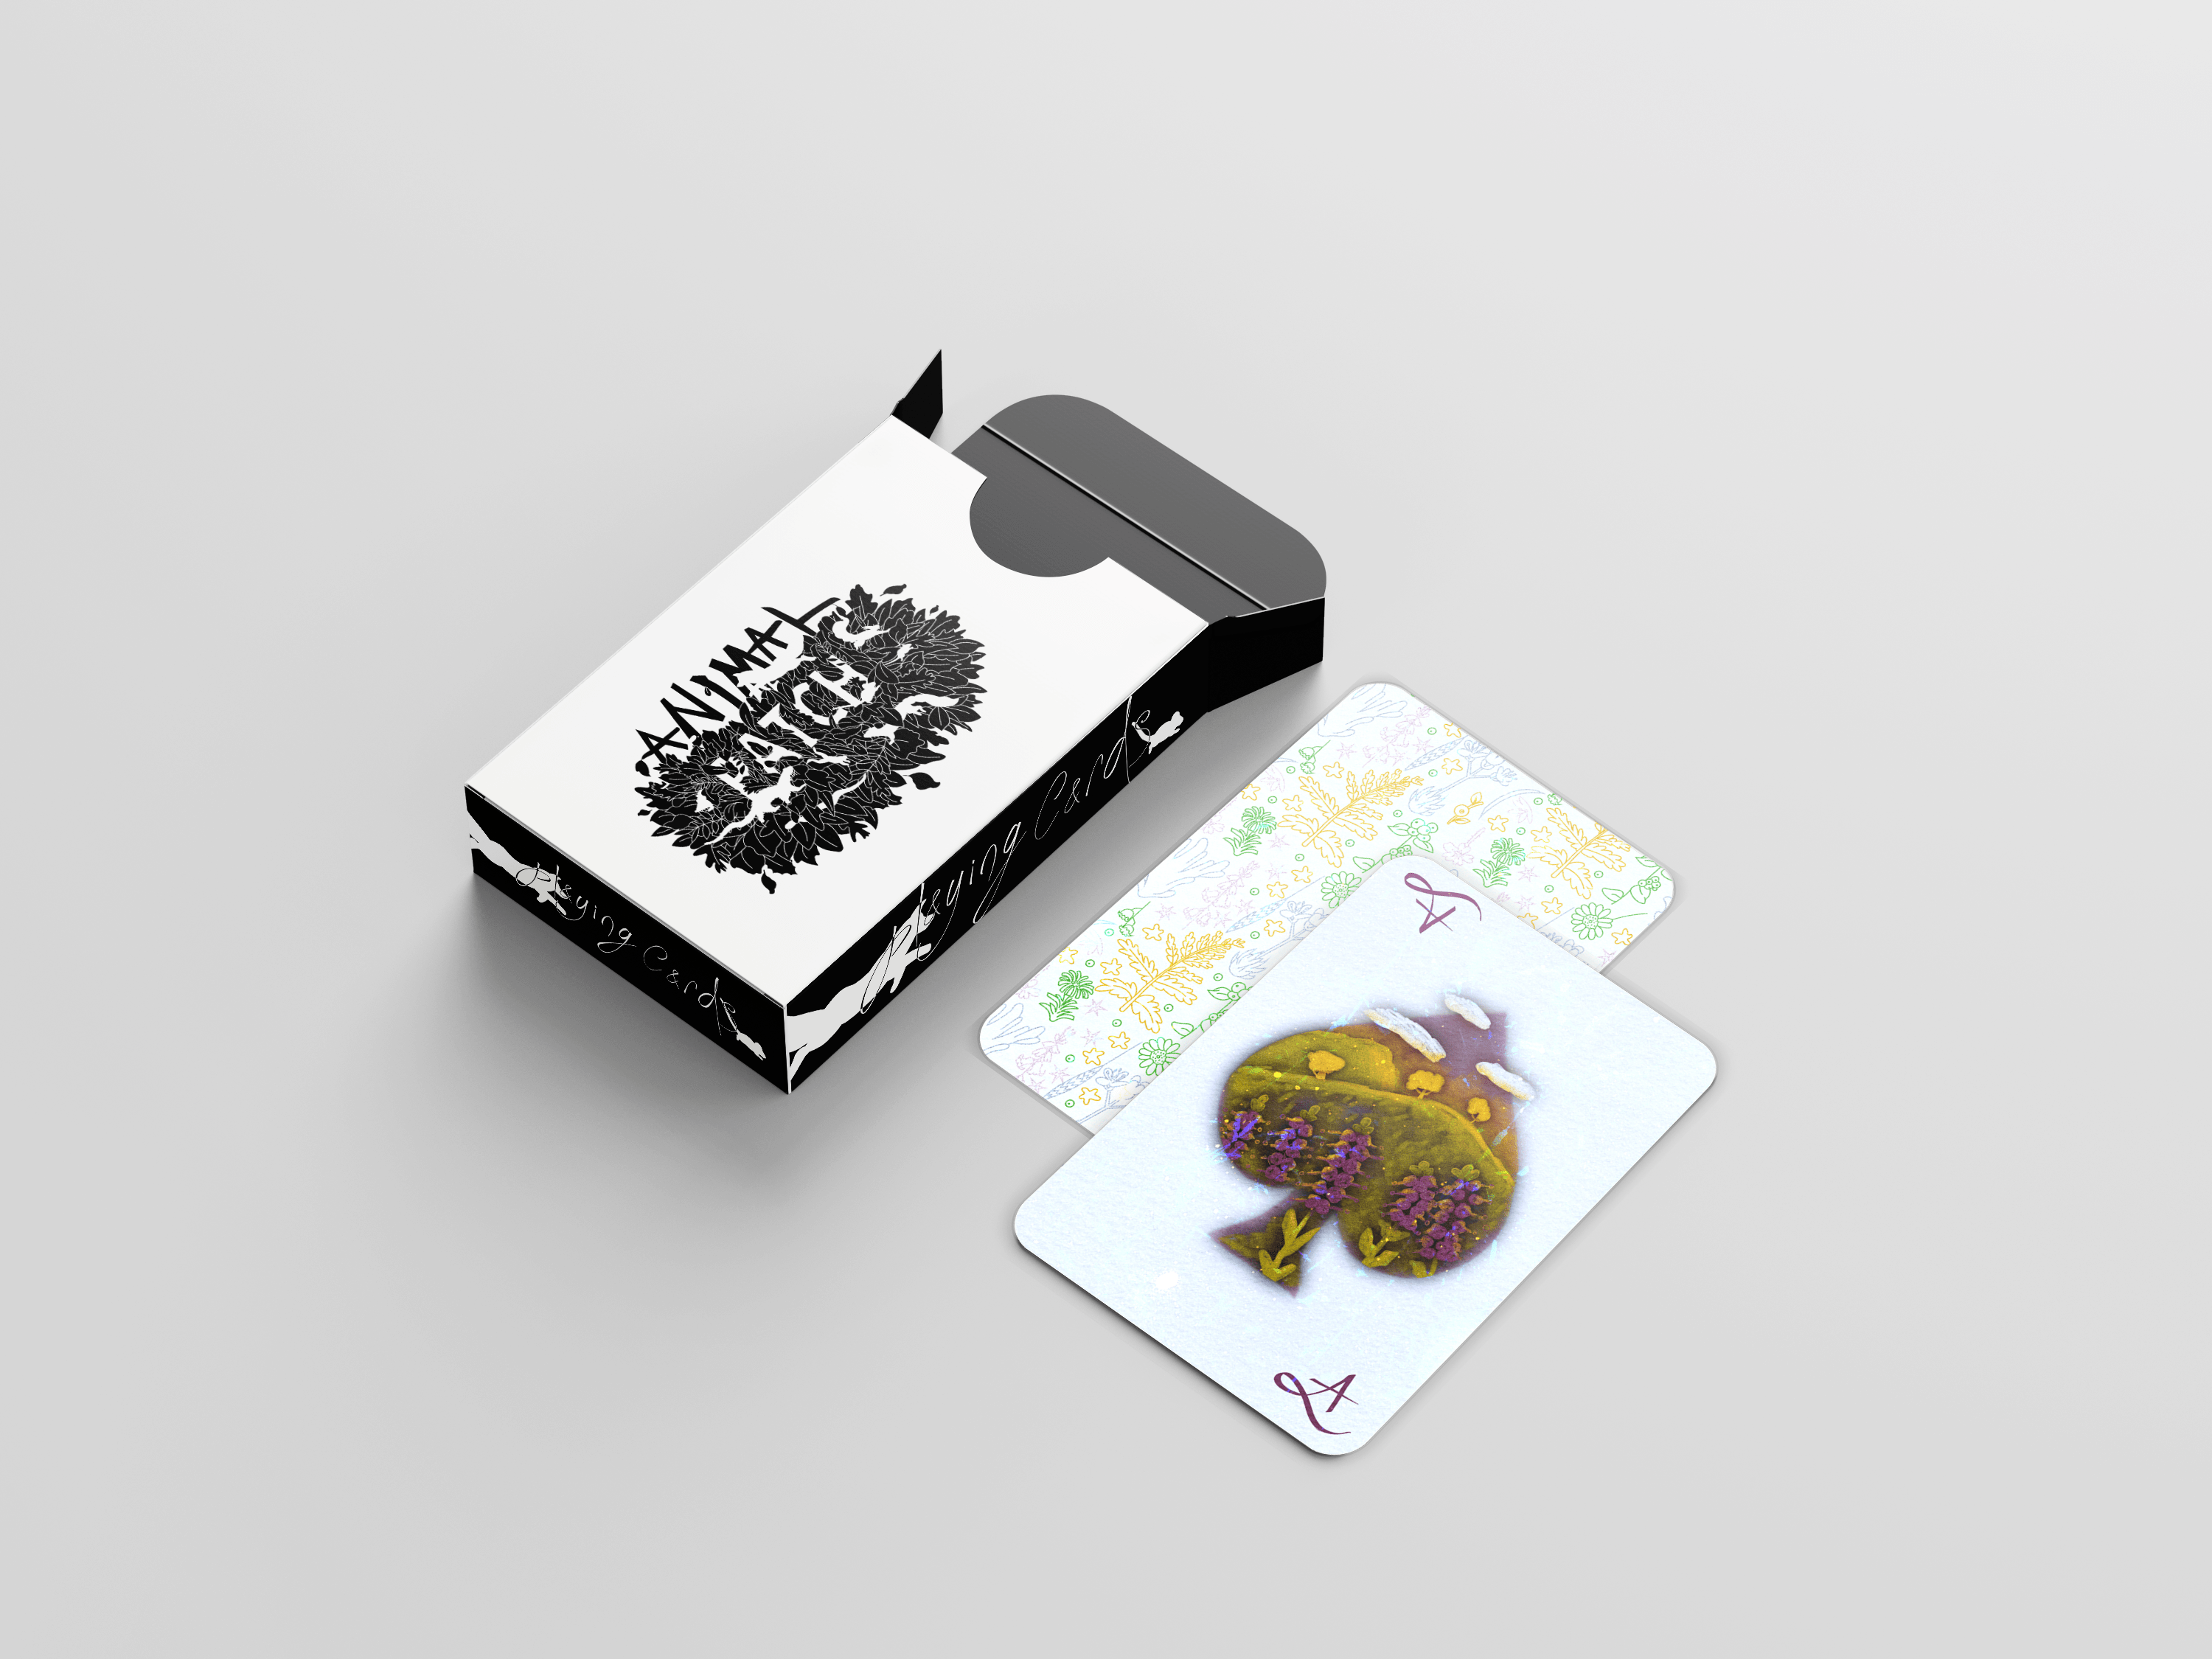 Illustrated Playing Cards and Packaging design.